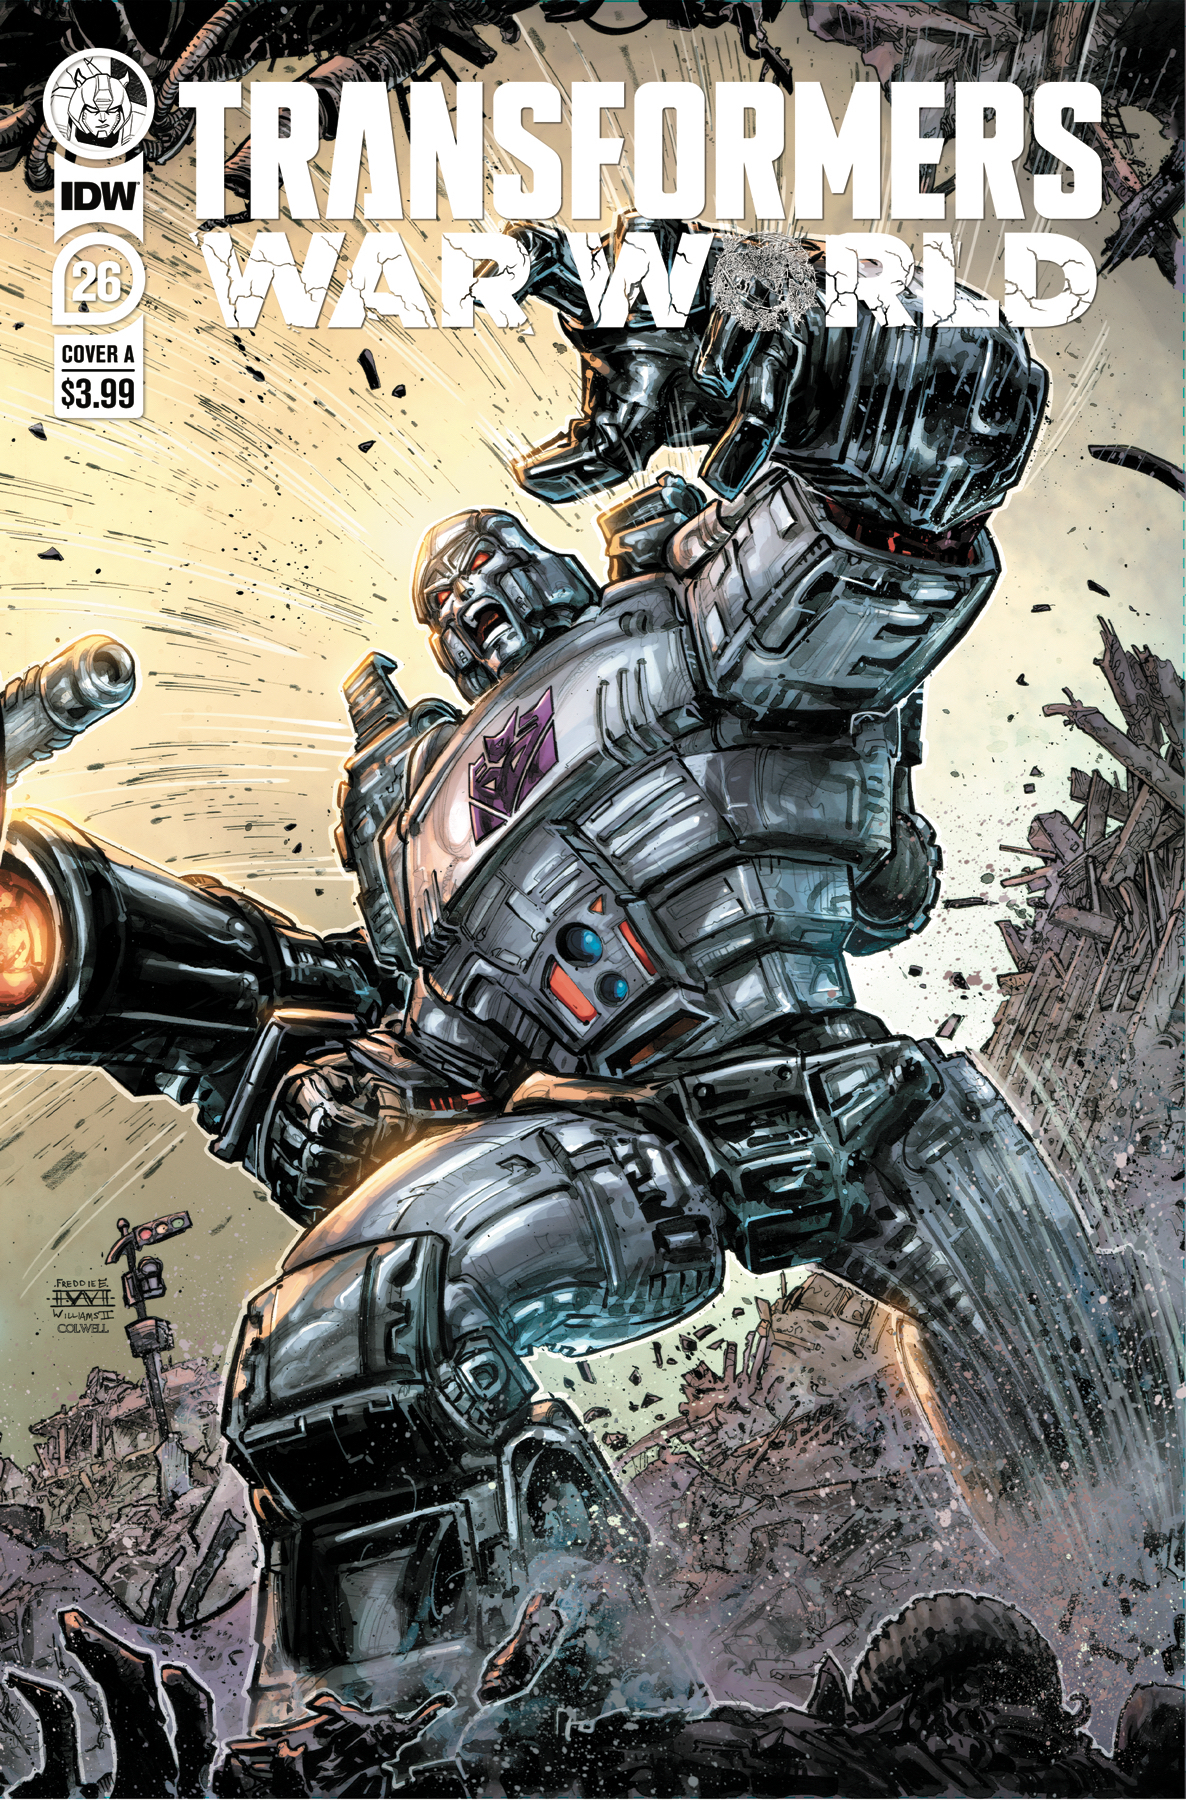 Transformers #26 Cover A Williams II